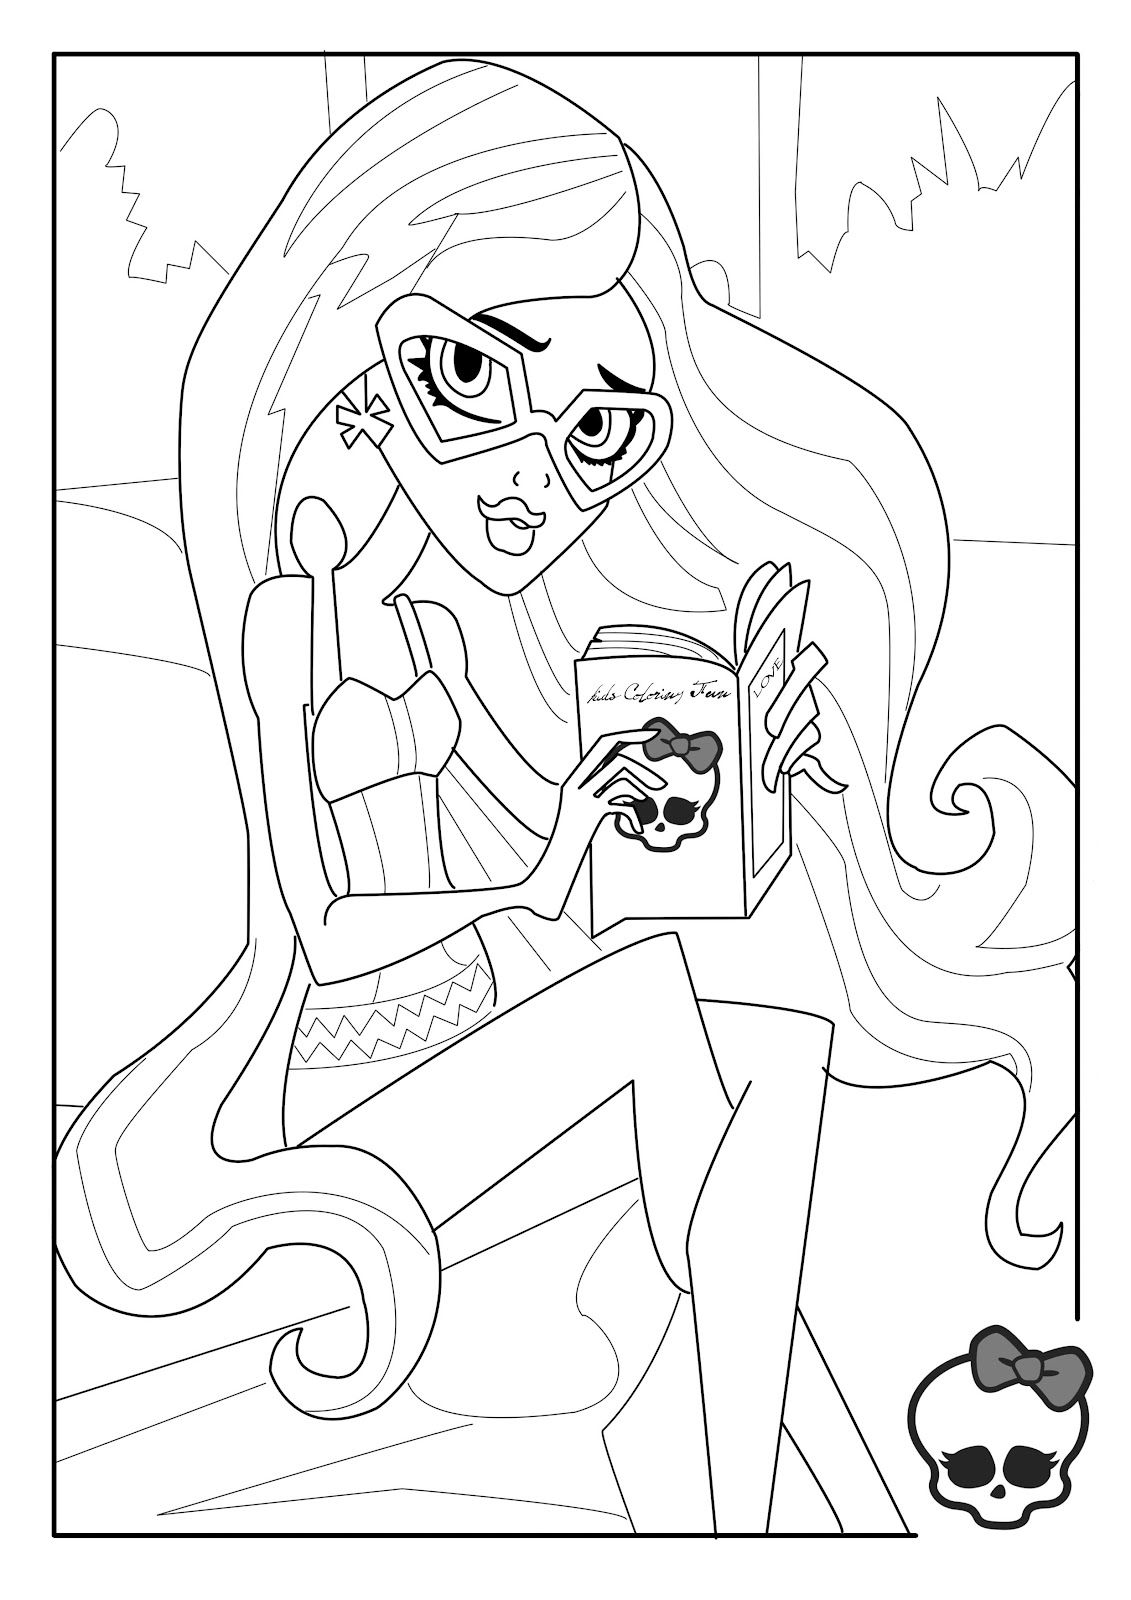  Monster High Coloring Pages | Coloring pages for Girls | Cool coloring page | #18